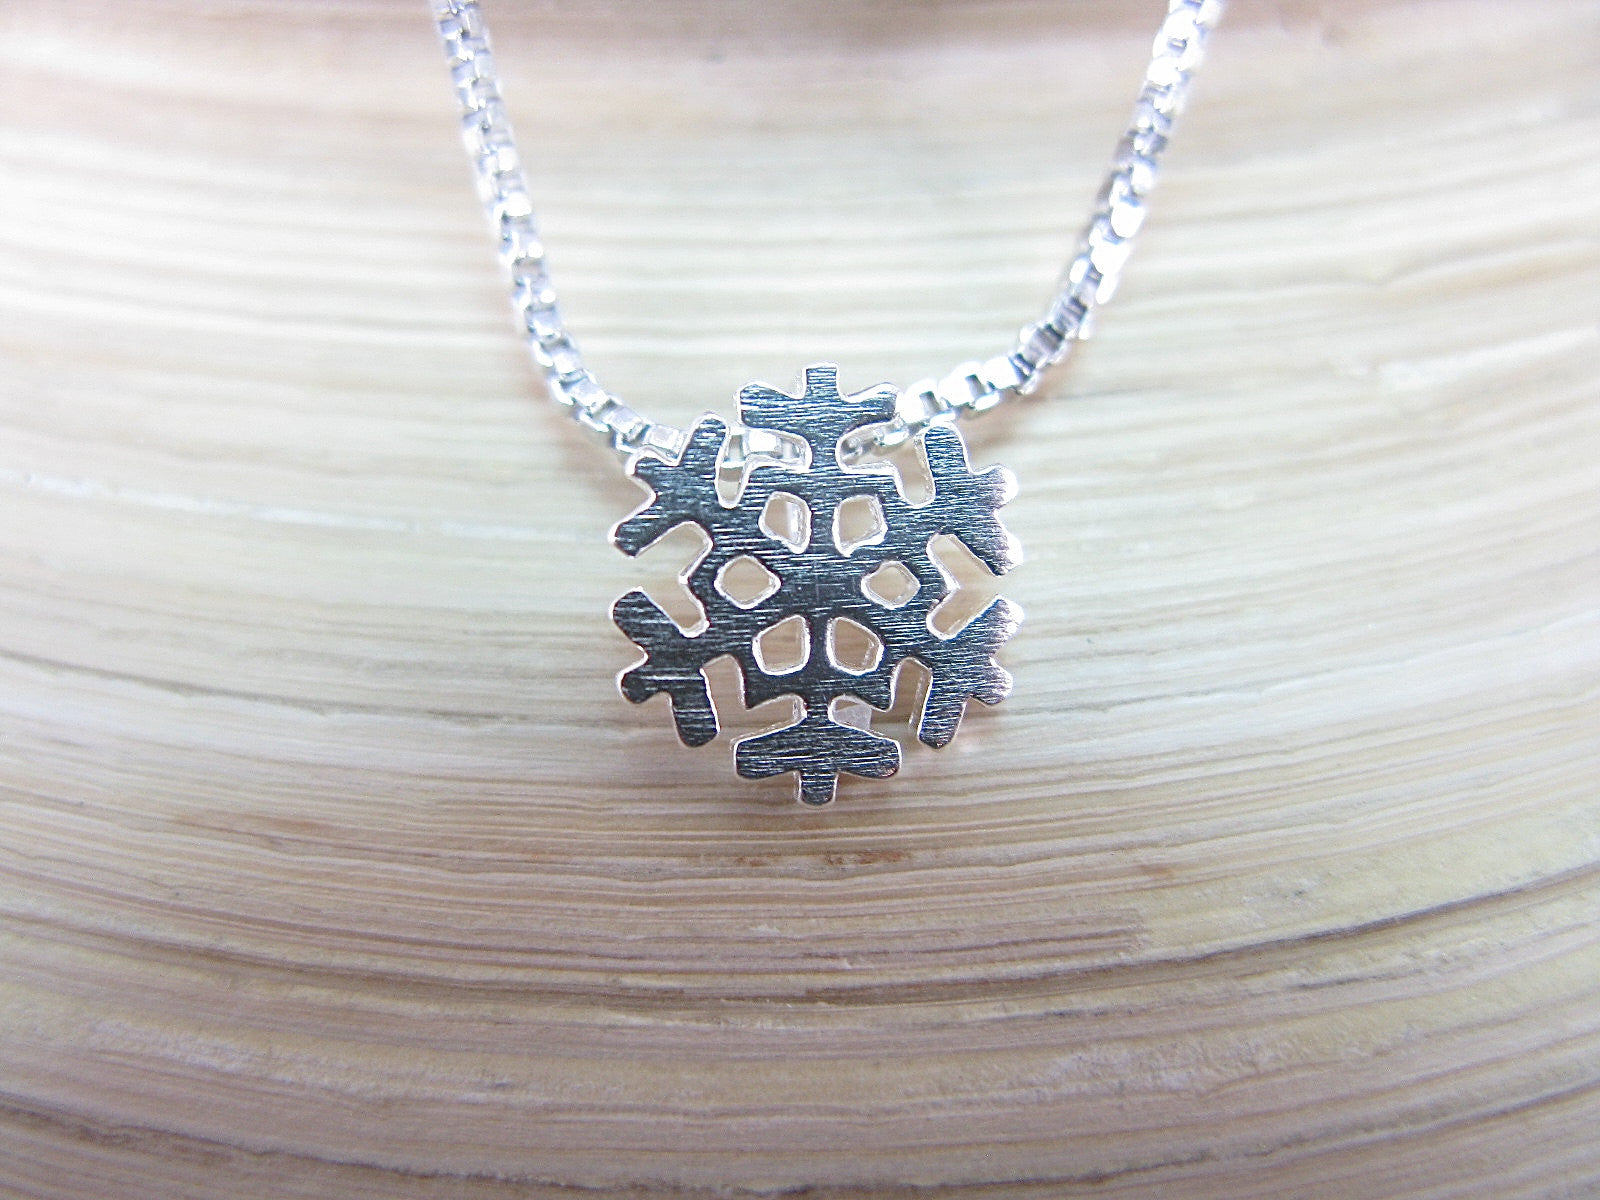 Snowflake Pendant Necklace in 925 Sterling Silver